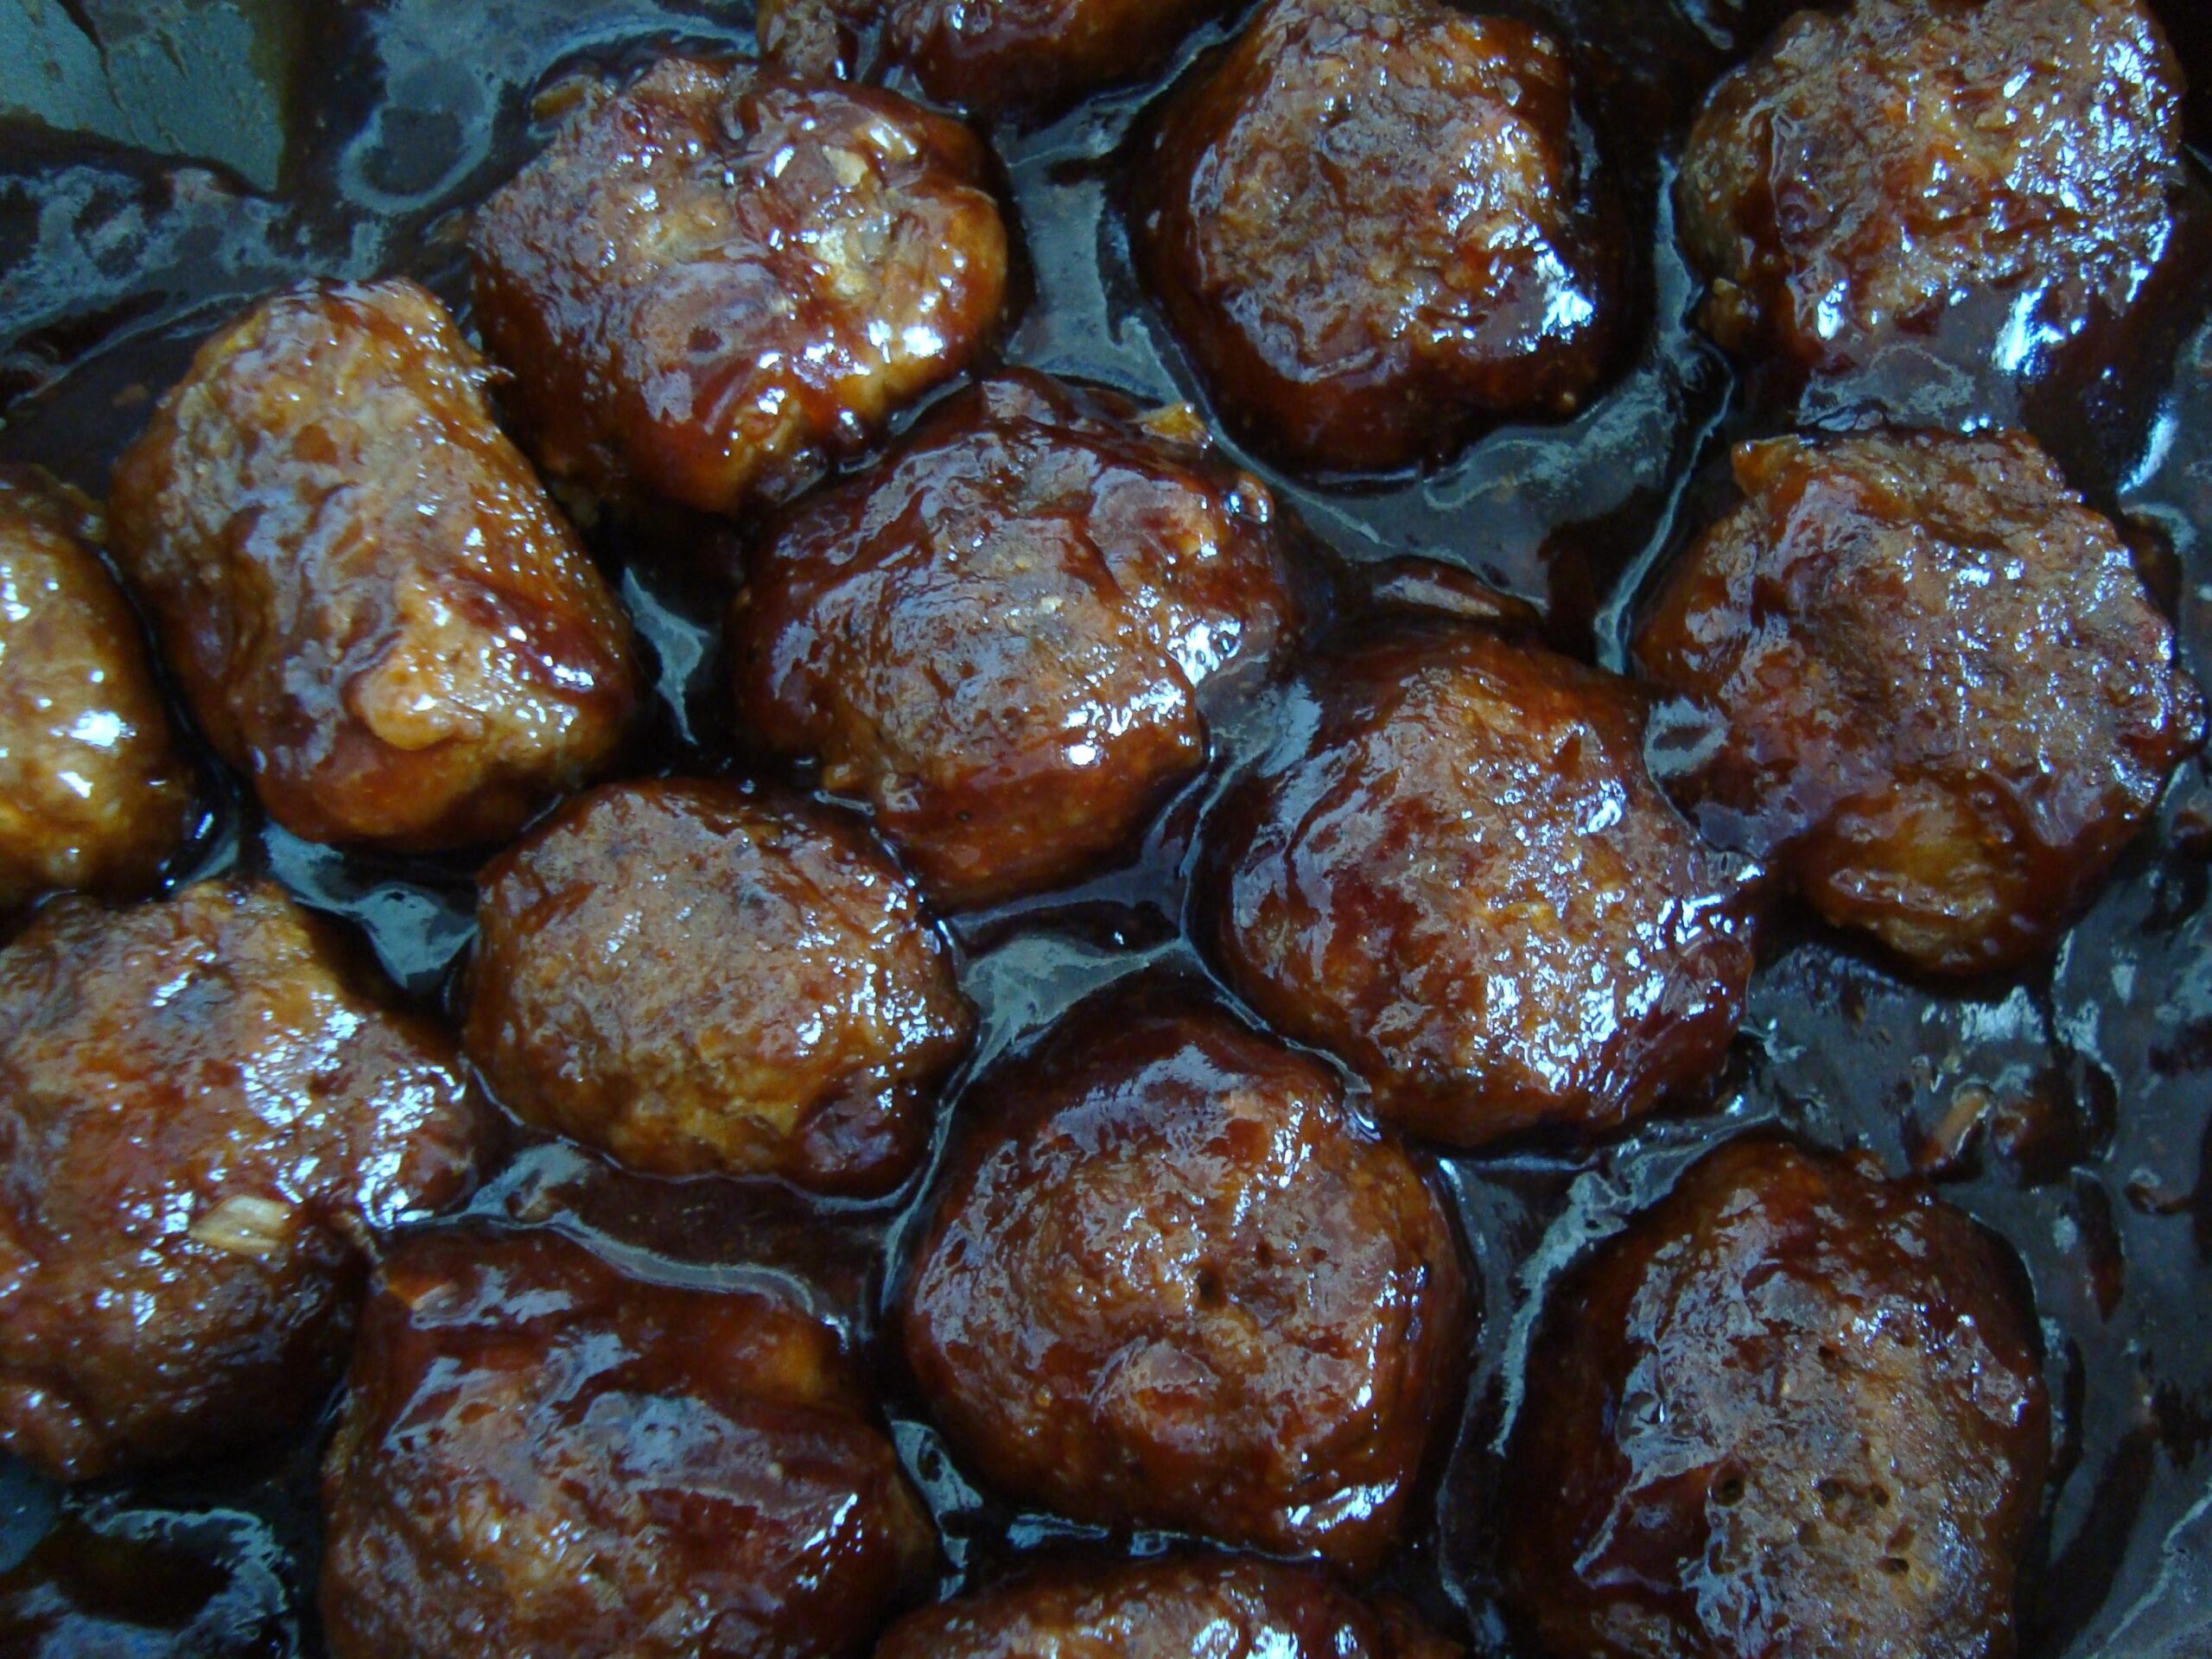  The aroma of these meatballs cooking will have your mouth watering.